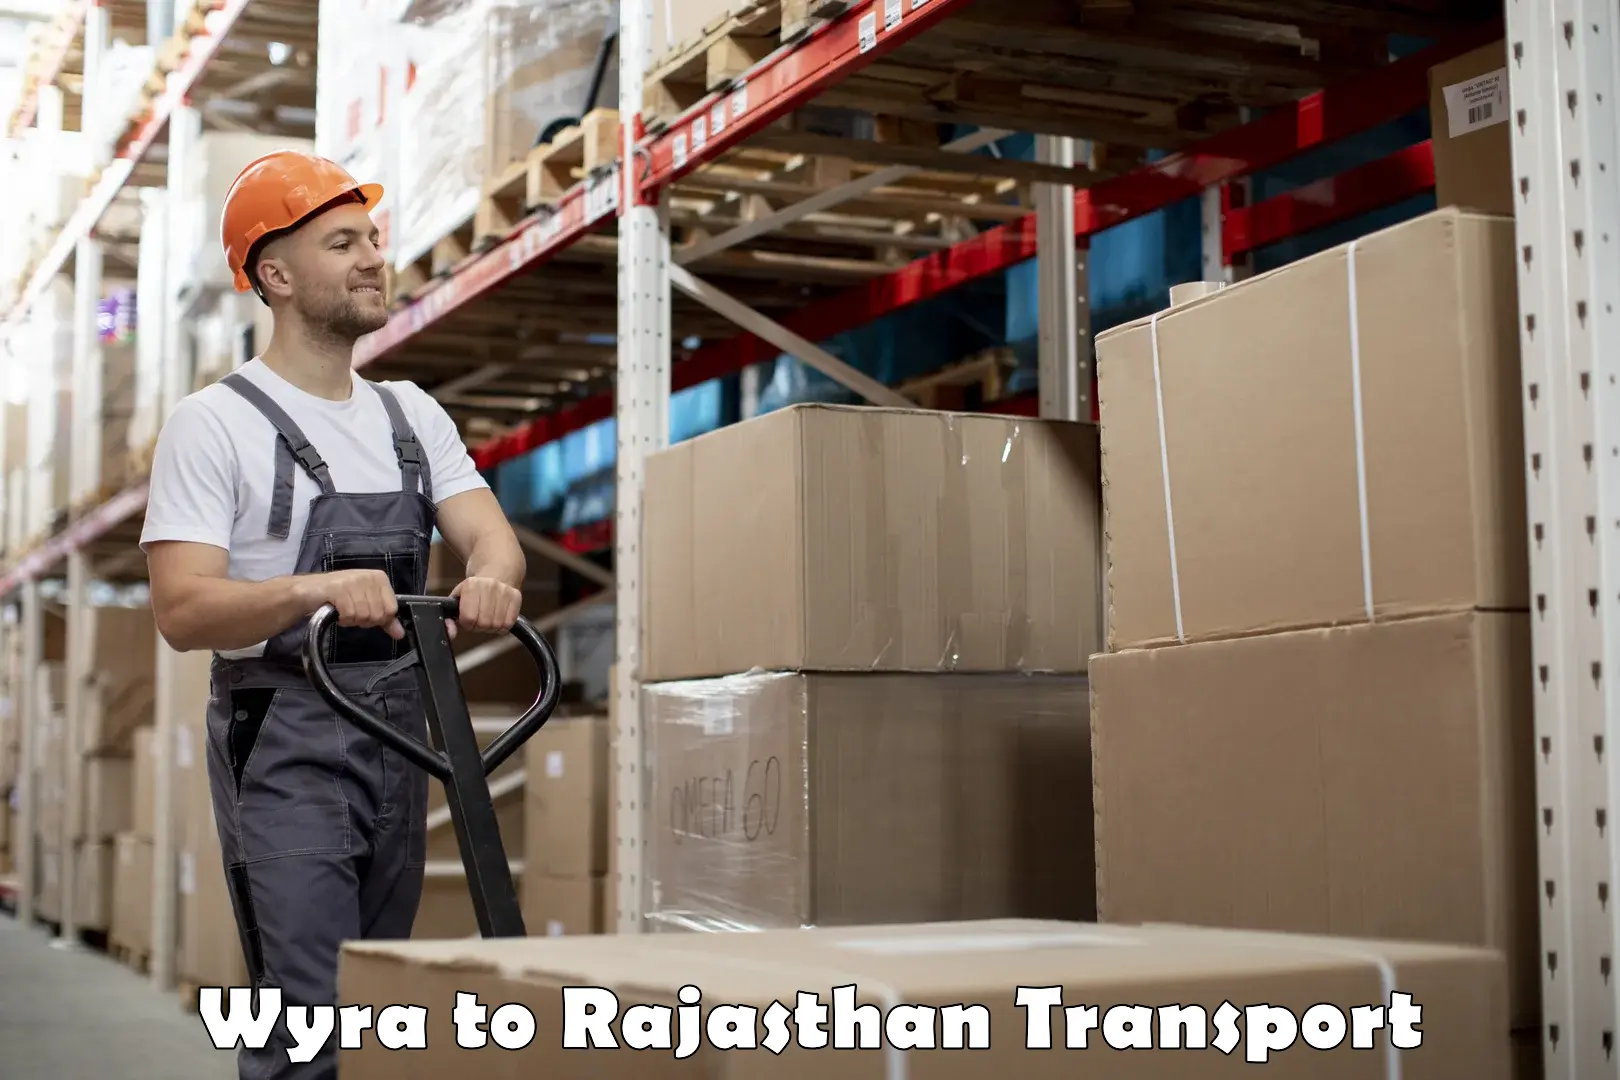 Truck transport companies in India Wyra to Jaipur